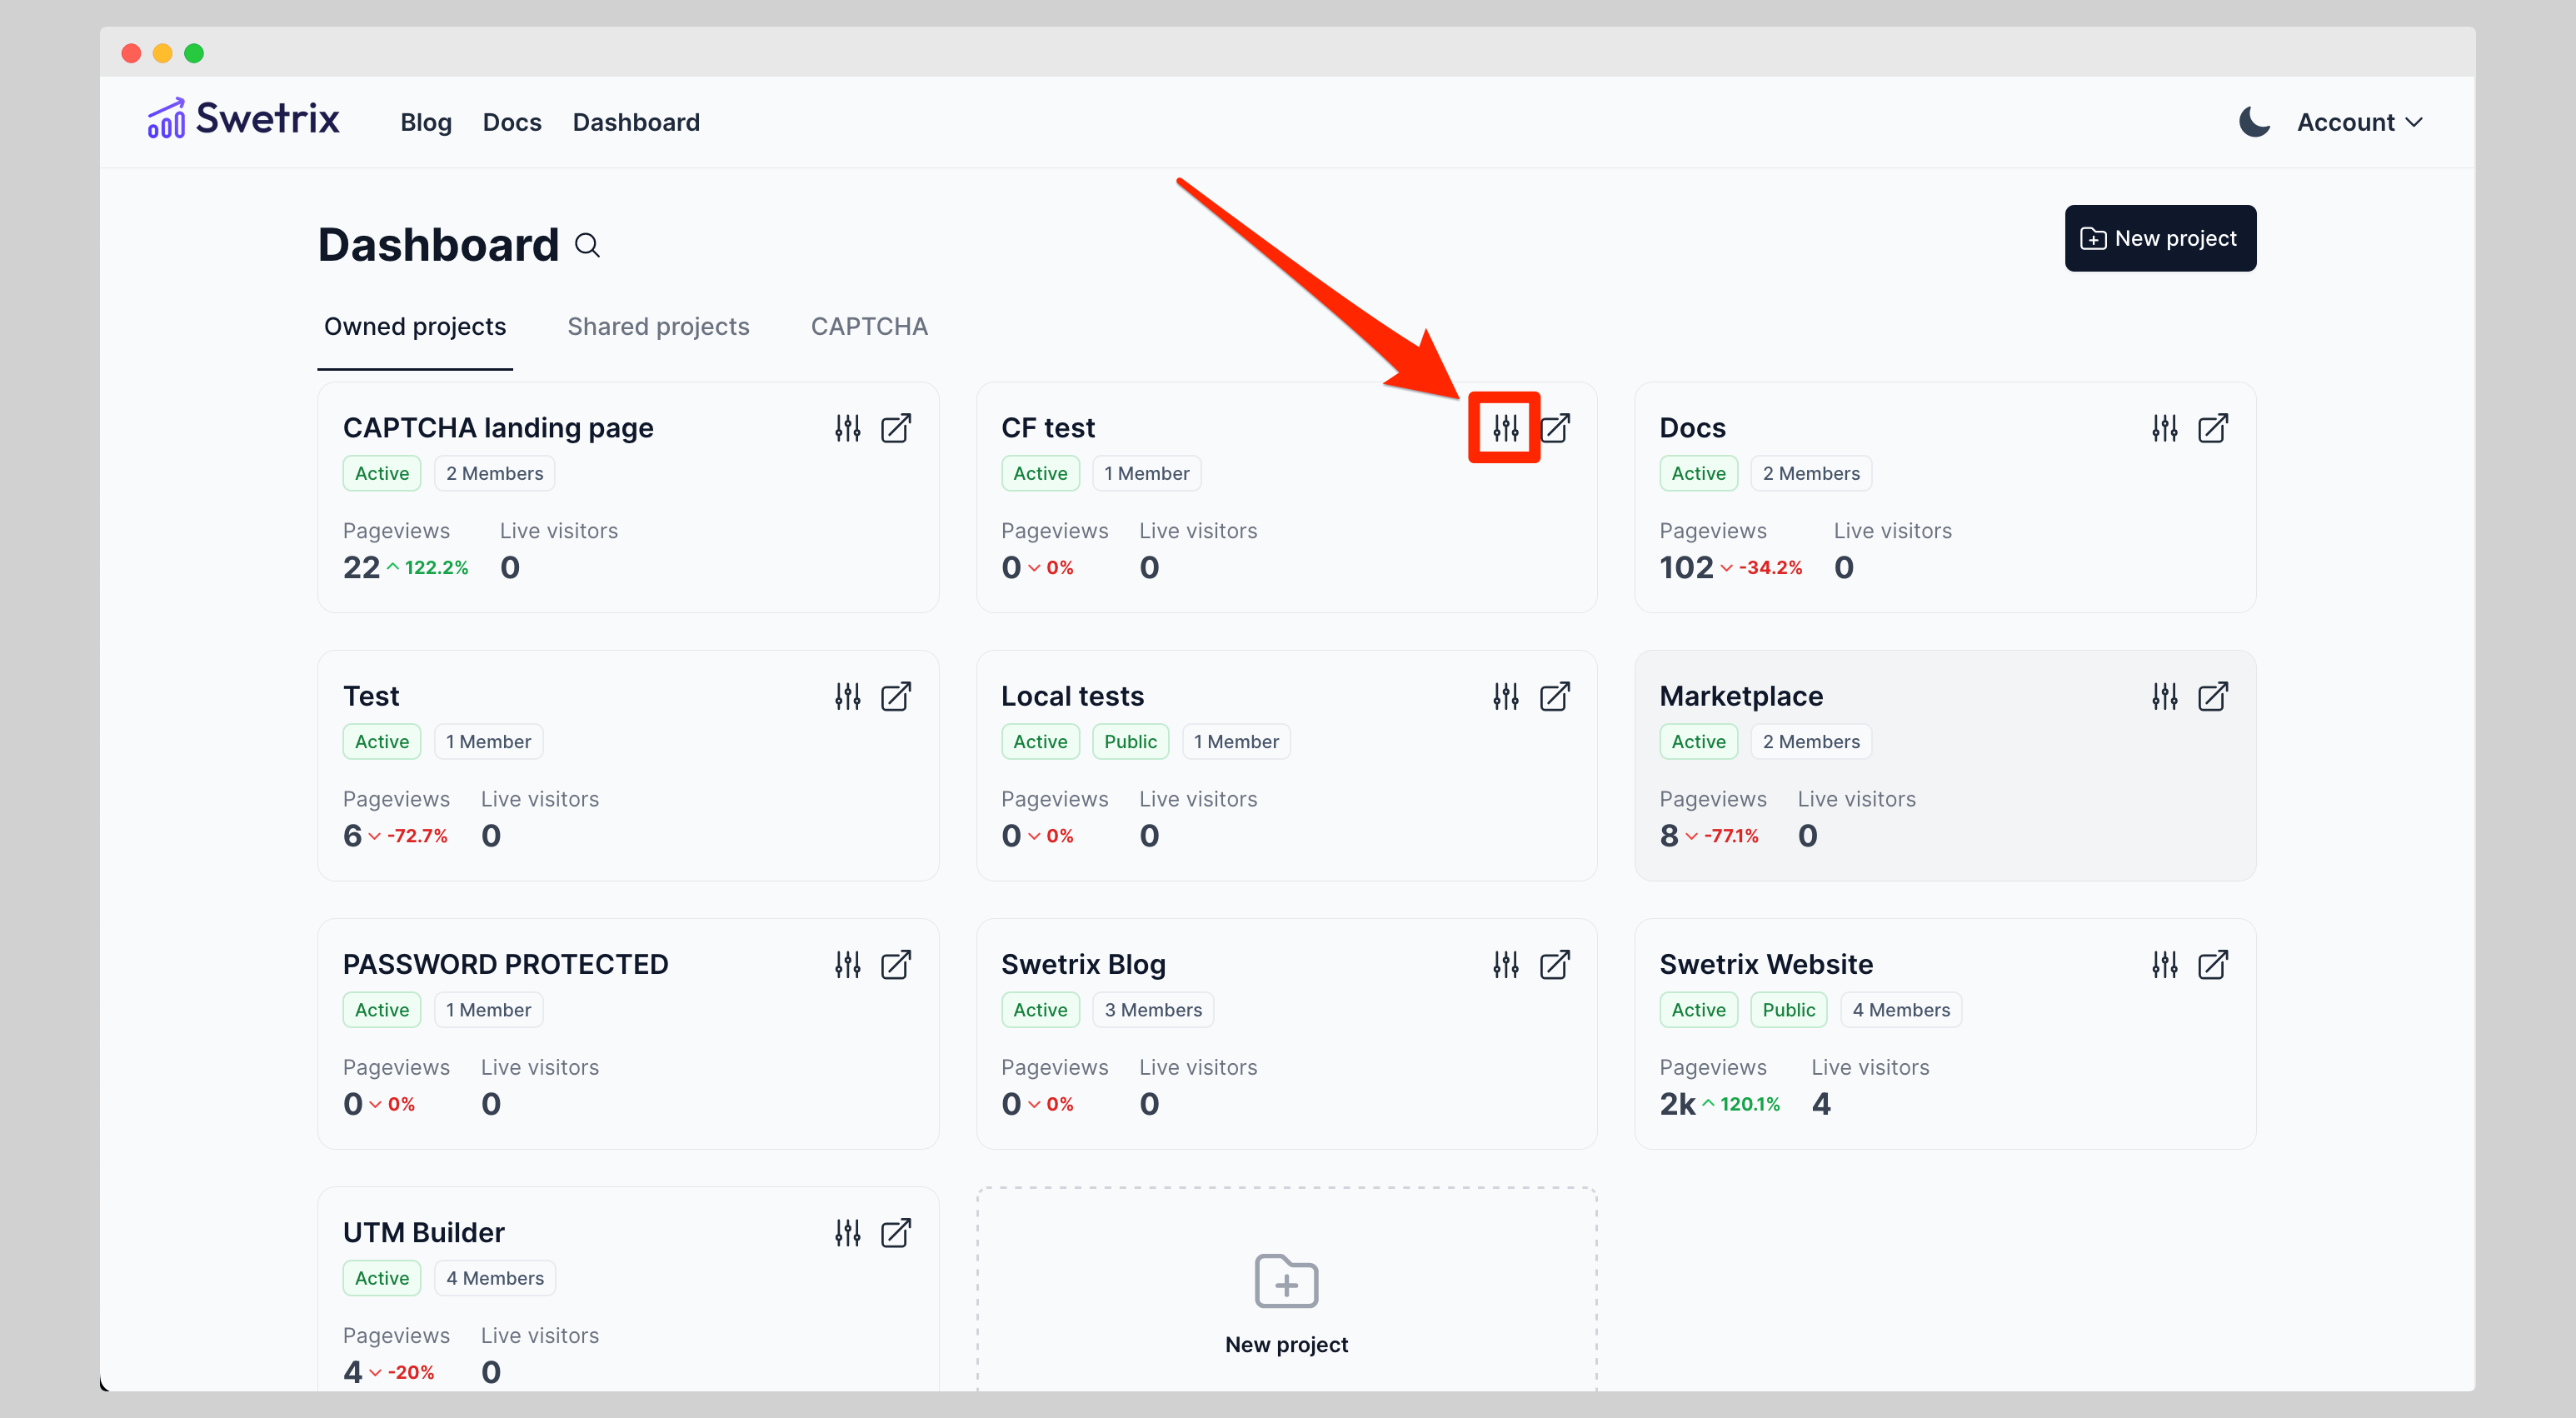 Settings from the Dashboard page